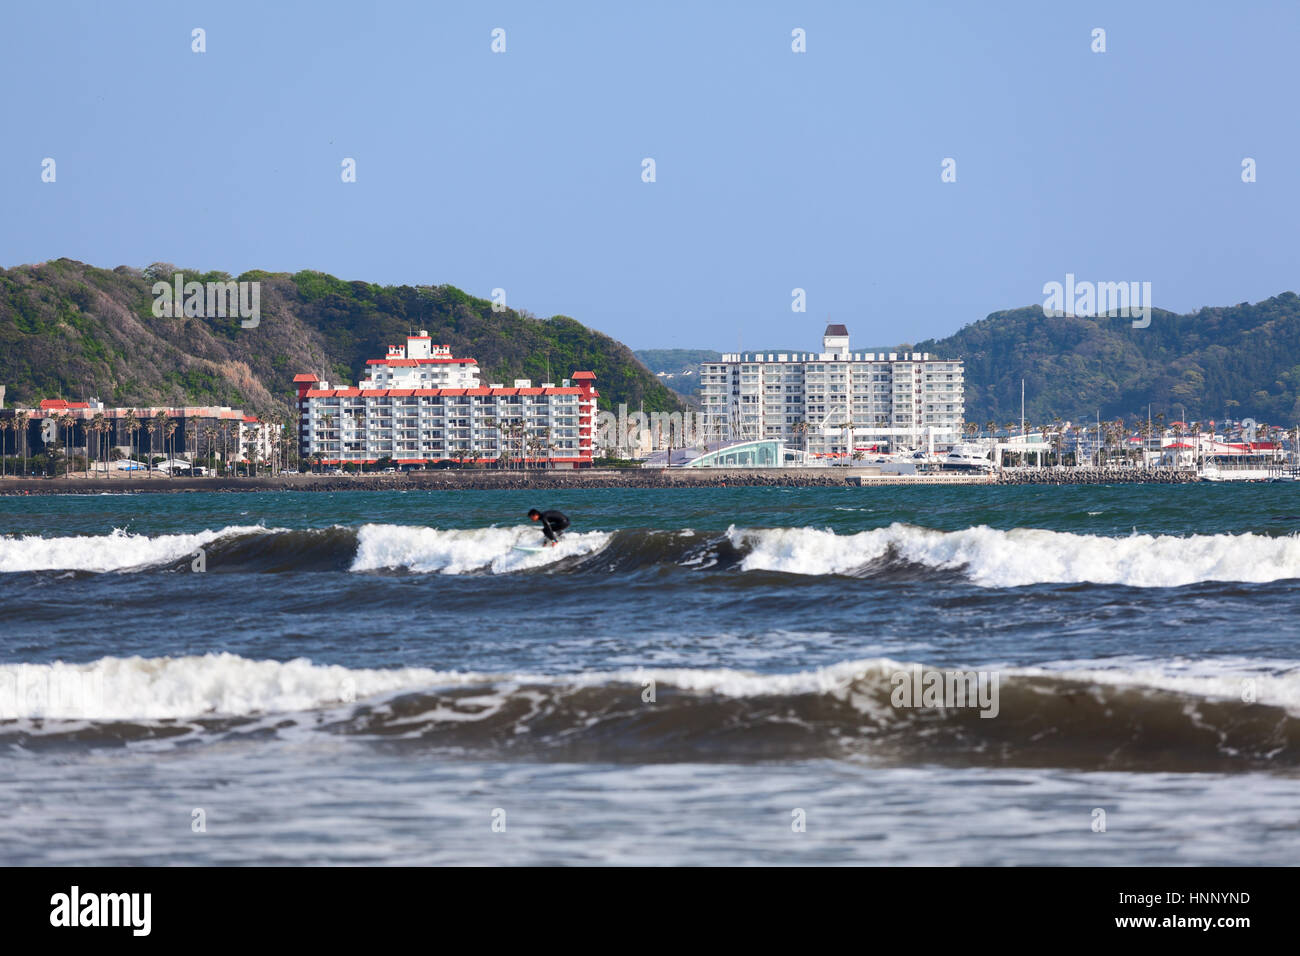 The Yuigahama beach with hotel buildings. It is a good place for surfing on coast of Pacific ocean in the Sagami Bay. Kamakura town, Japan Stock Photo